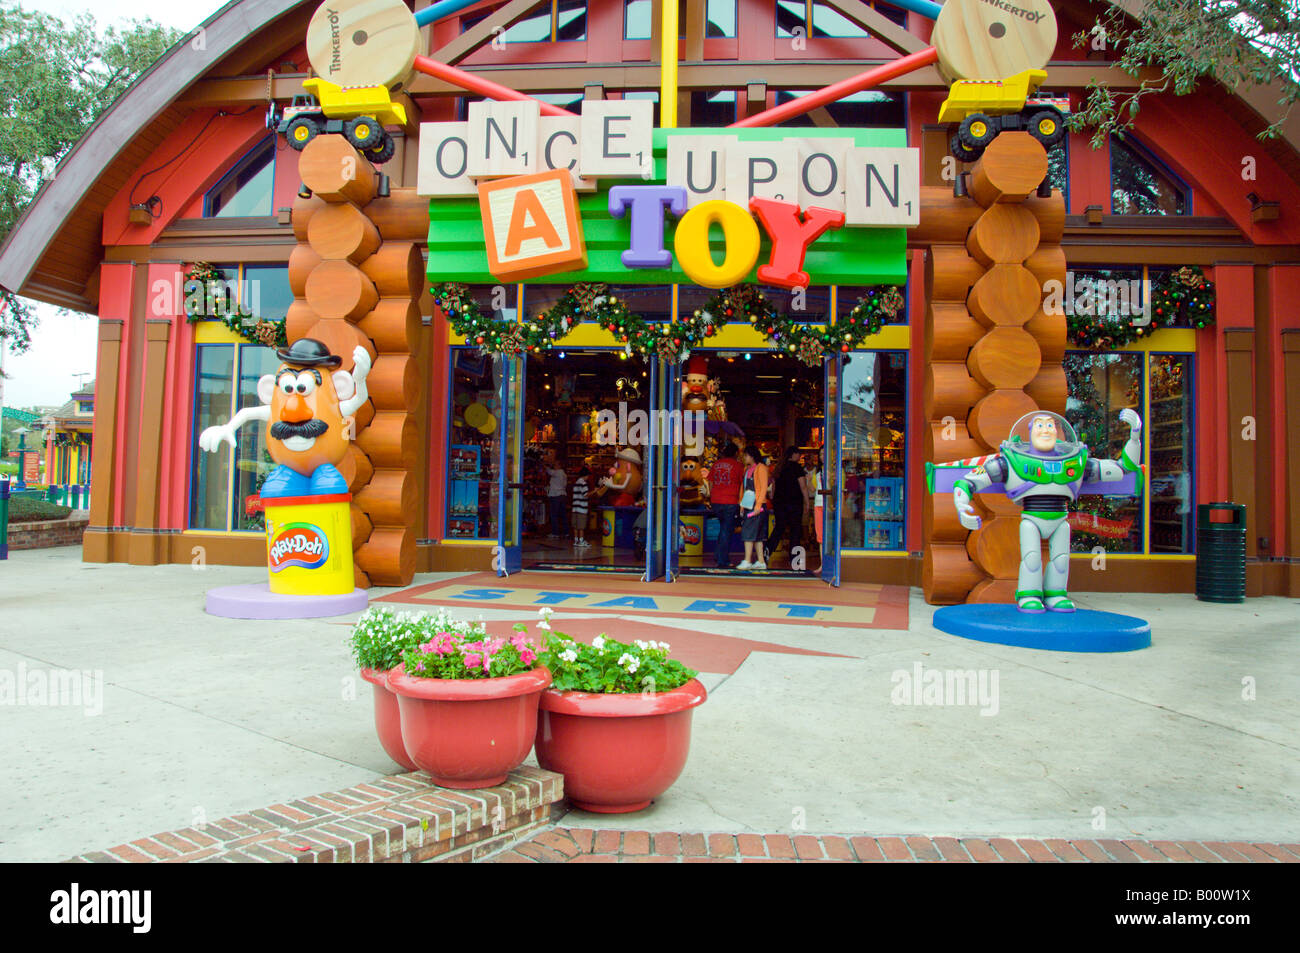 The Once Upon a Toy shop in Downtown Disney in Orlando Florida USA Stock Photo